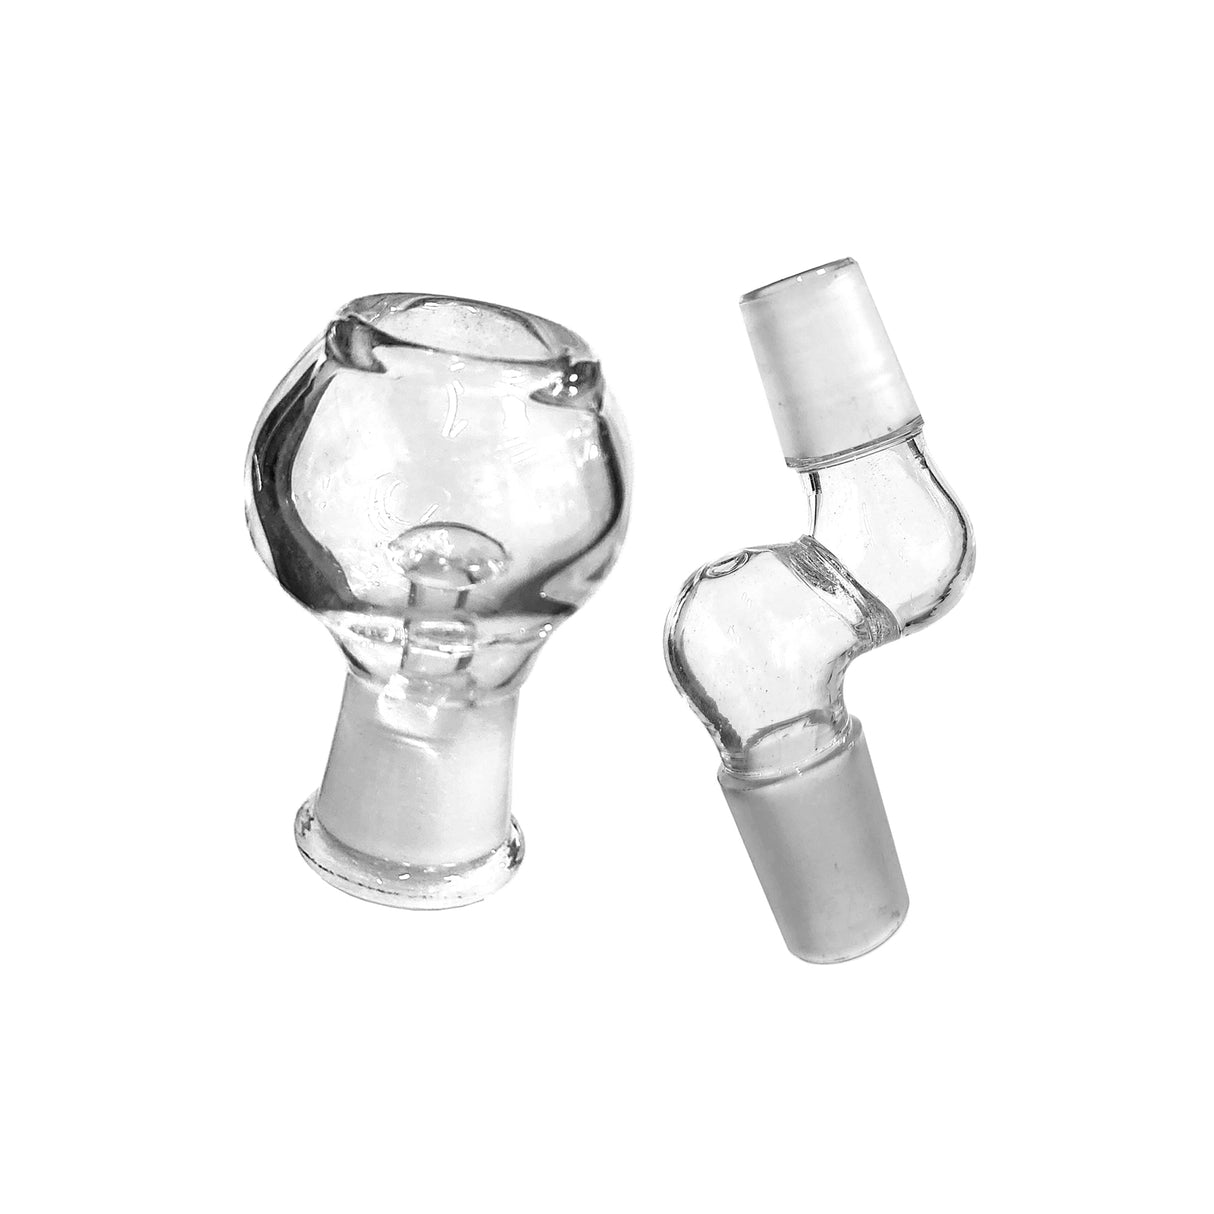 19mm Glass Nail Dome Adapter Set